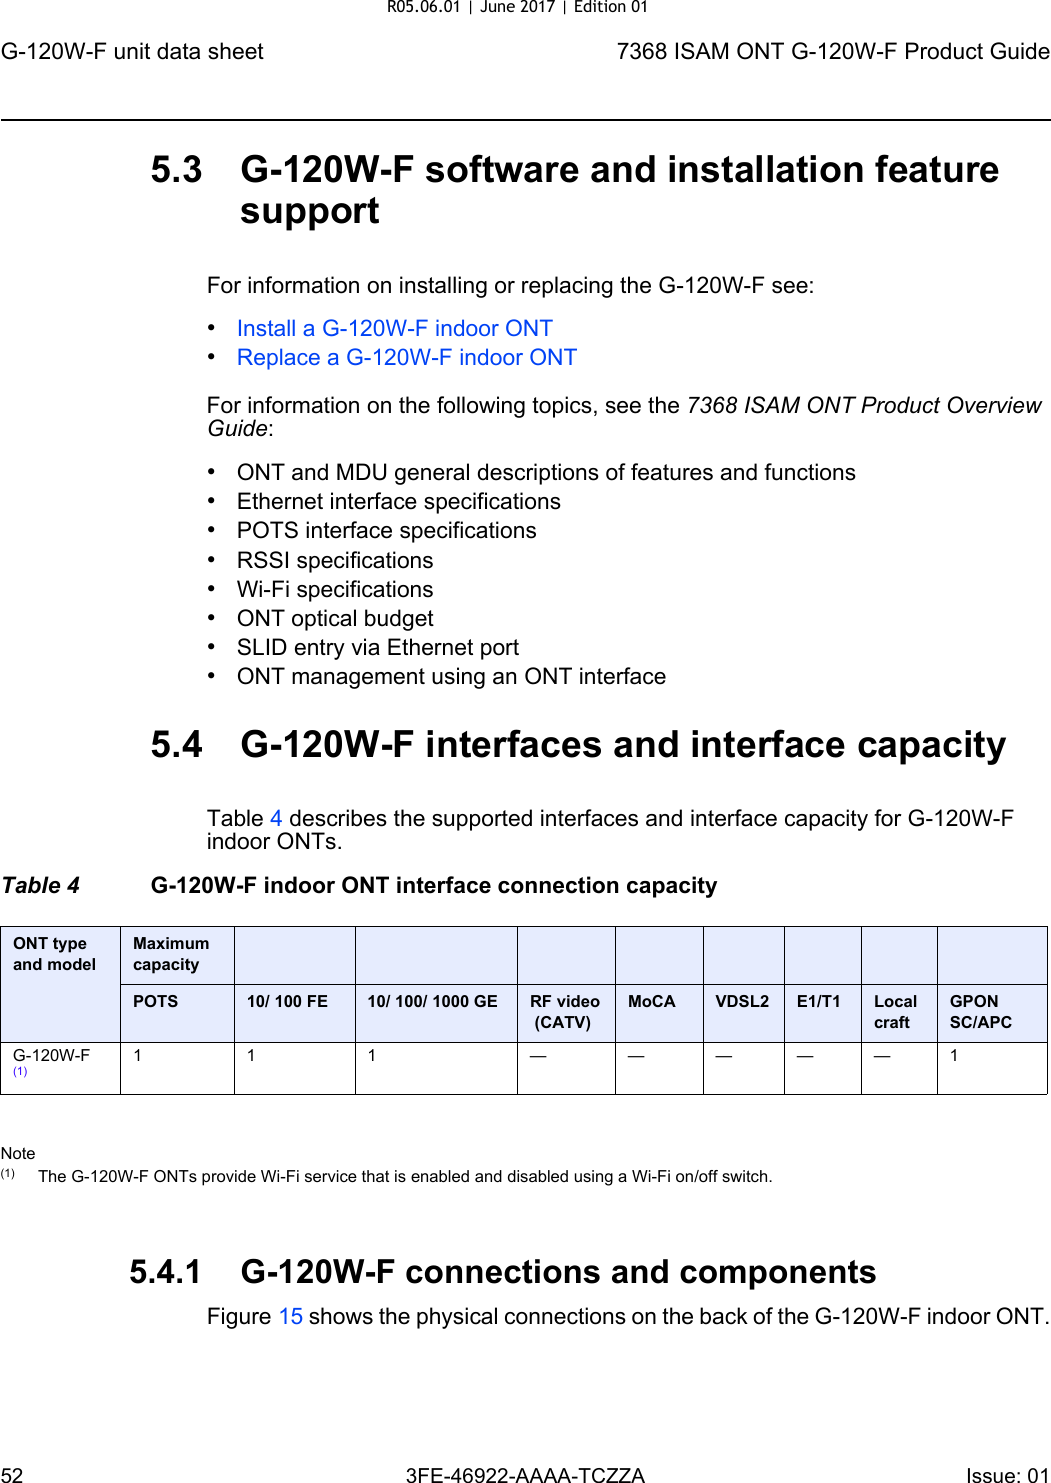 G-120W-F unit data sheet527368 ISAM ONT G-120W-F Product Guide3FE-46922-AAAA-TCZZA Issue: 01 5.3 G-120W-F software and installation feature supportFor information on installing or replacing the G-120W-F see:•Install a G-120W-F indoor ONT•Replace a G-120W-F indoor ONTFor information on the following topics, see the 7368 ISAM ONT Product Overview Guide:•ONT and MDU general descriptions of features and functions•Ethernet interface specifications•POTS interface specifications•RSSI specifications•Wi-Fi specifications•ONT optical budget•SLID entry via Ethernet port•ONT management using an ONT interface5.4 G-120W-F interfaces and interface capacityTable 4 describes the supported interfaces and interface capacity for G-120W-F indoor ONTs.Table 4 G-120W-F indoor ONT interface connection capacityNote(1) The G-120W-F ONTs provide Wi-Fi service that is enabled and disabled using a Wi-Fi on/off switch. 5.4.1 G-120W-F connections and componentsFigure 15 shows the physical connections on the back of the G-120W-F indoor ONT.ONT type and model Maximum capacityPOTS 10/ 100 FE 10/ 100/ 1000 GE RF video (CATV)MoCA VDSL2 E1/T1 Local craftGPON SC/APCG-120W-F (1)11 1 —————1R05.06.01 | June 2017 | Edition 01 